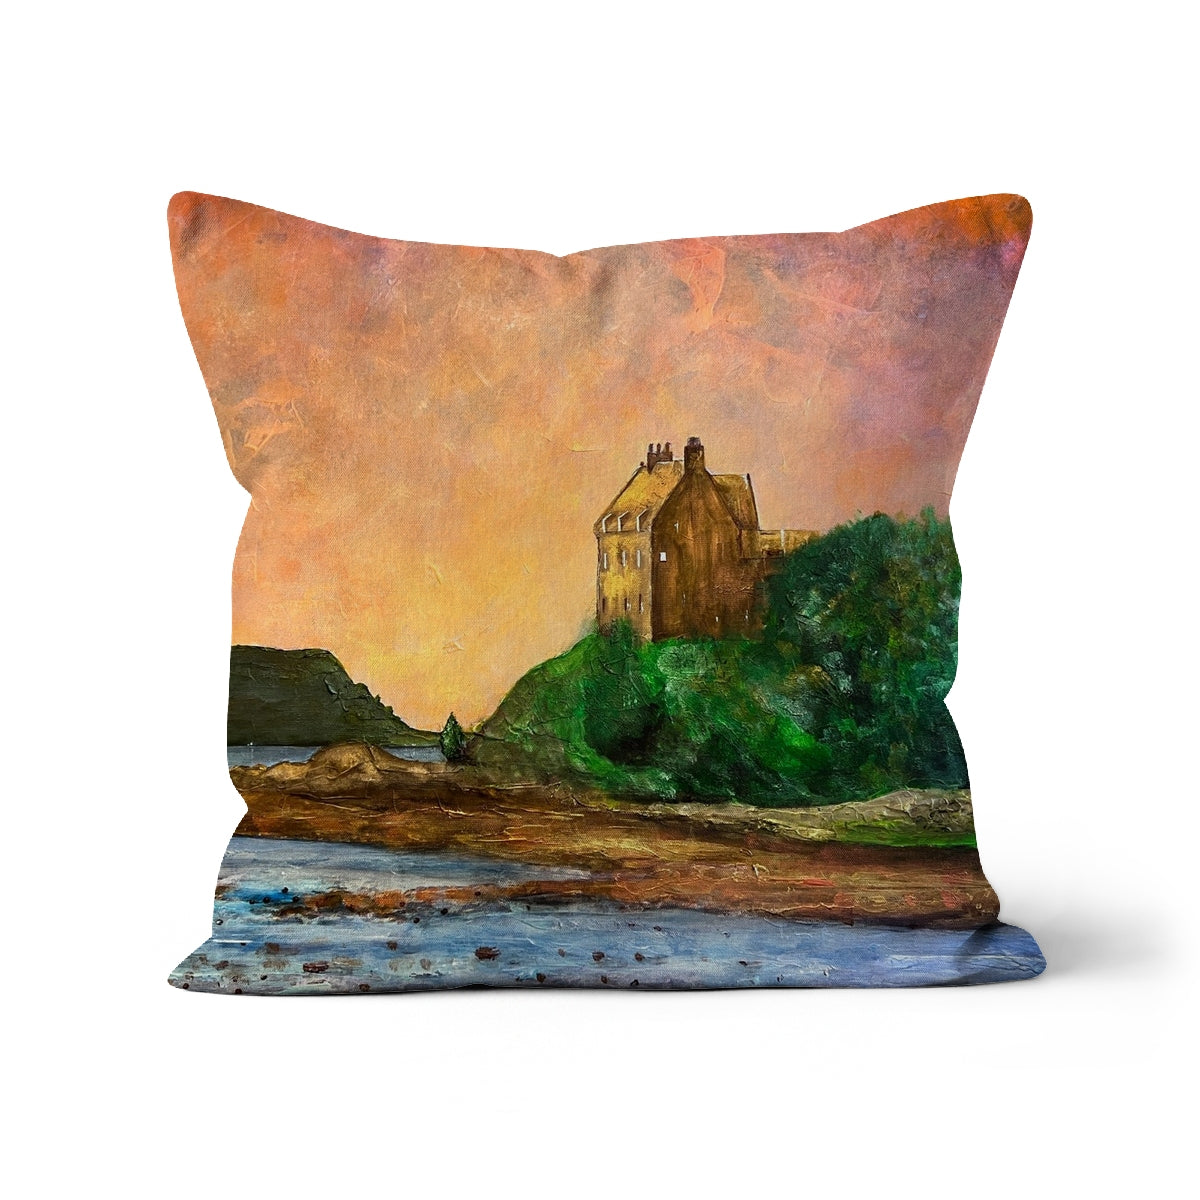 Duntrune Castle Art Gifts Cushion-Cushions-Historic & Iconic Scotland Art Gallery-Canvas-12"x12"-Paintings, Prints, Homeware, Art Gifts From Scotland By Scottish Artist Kevin Hunter